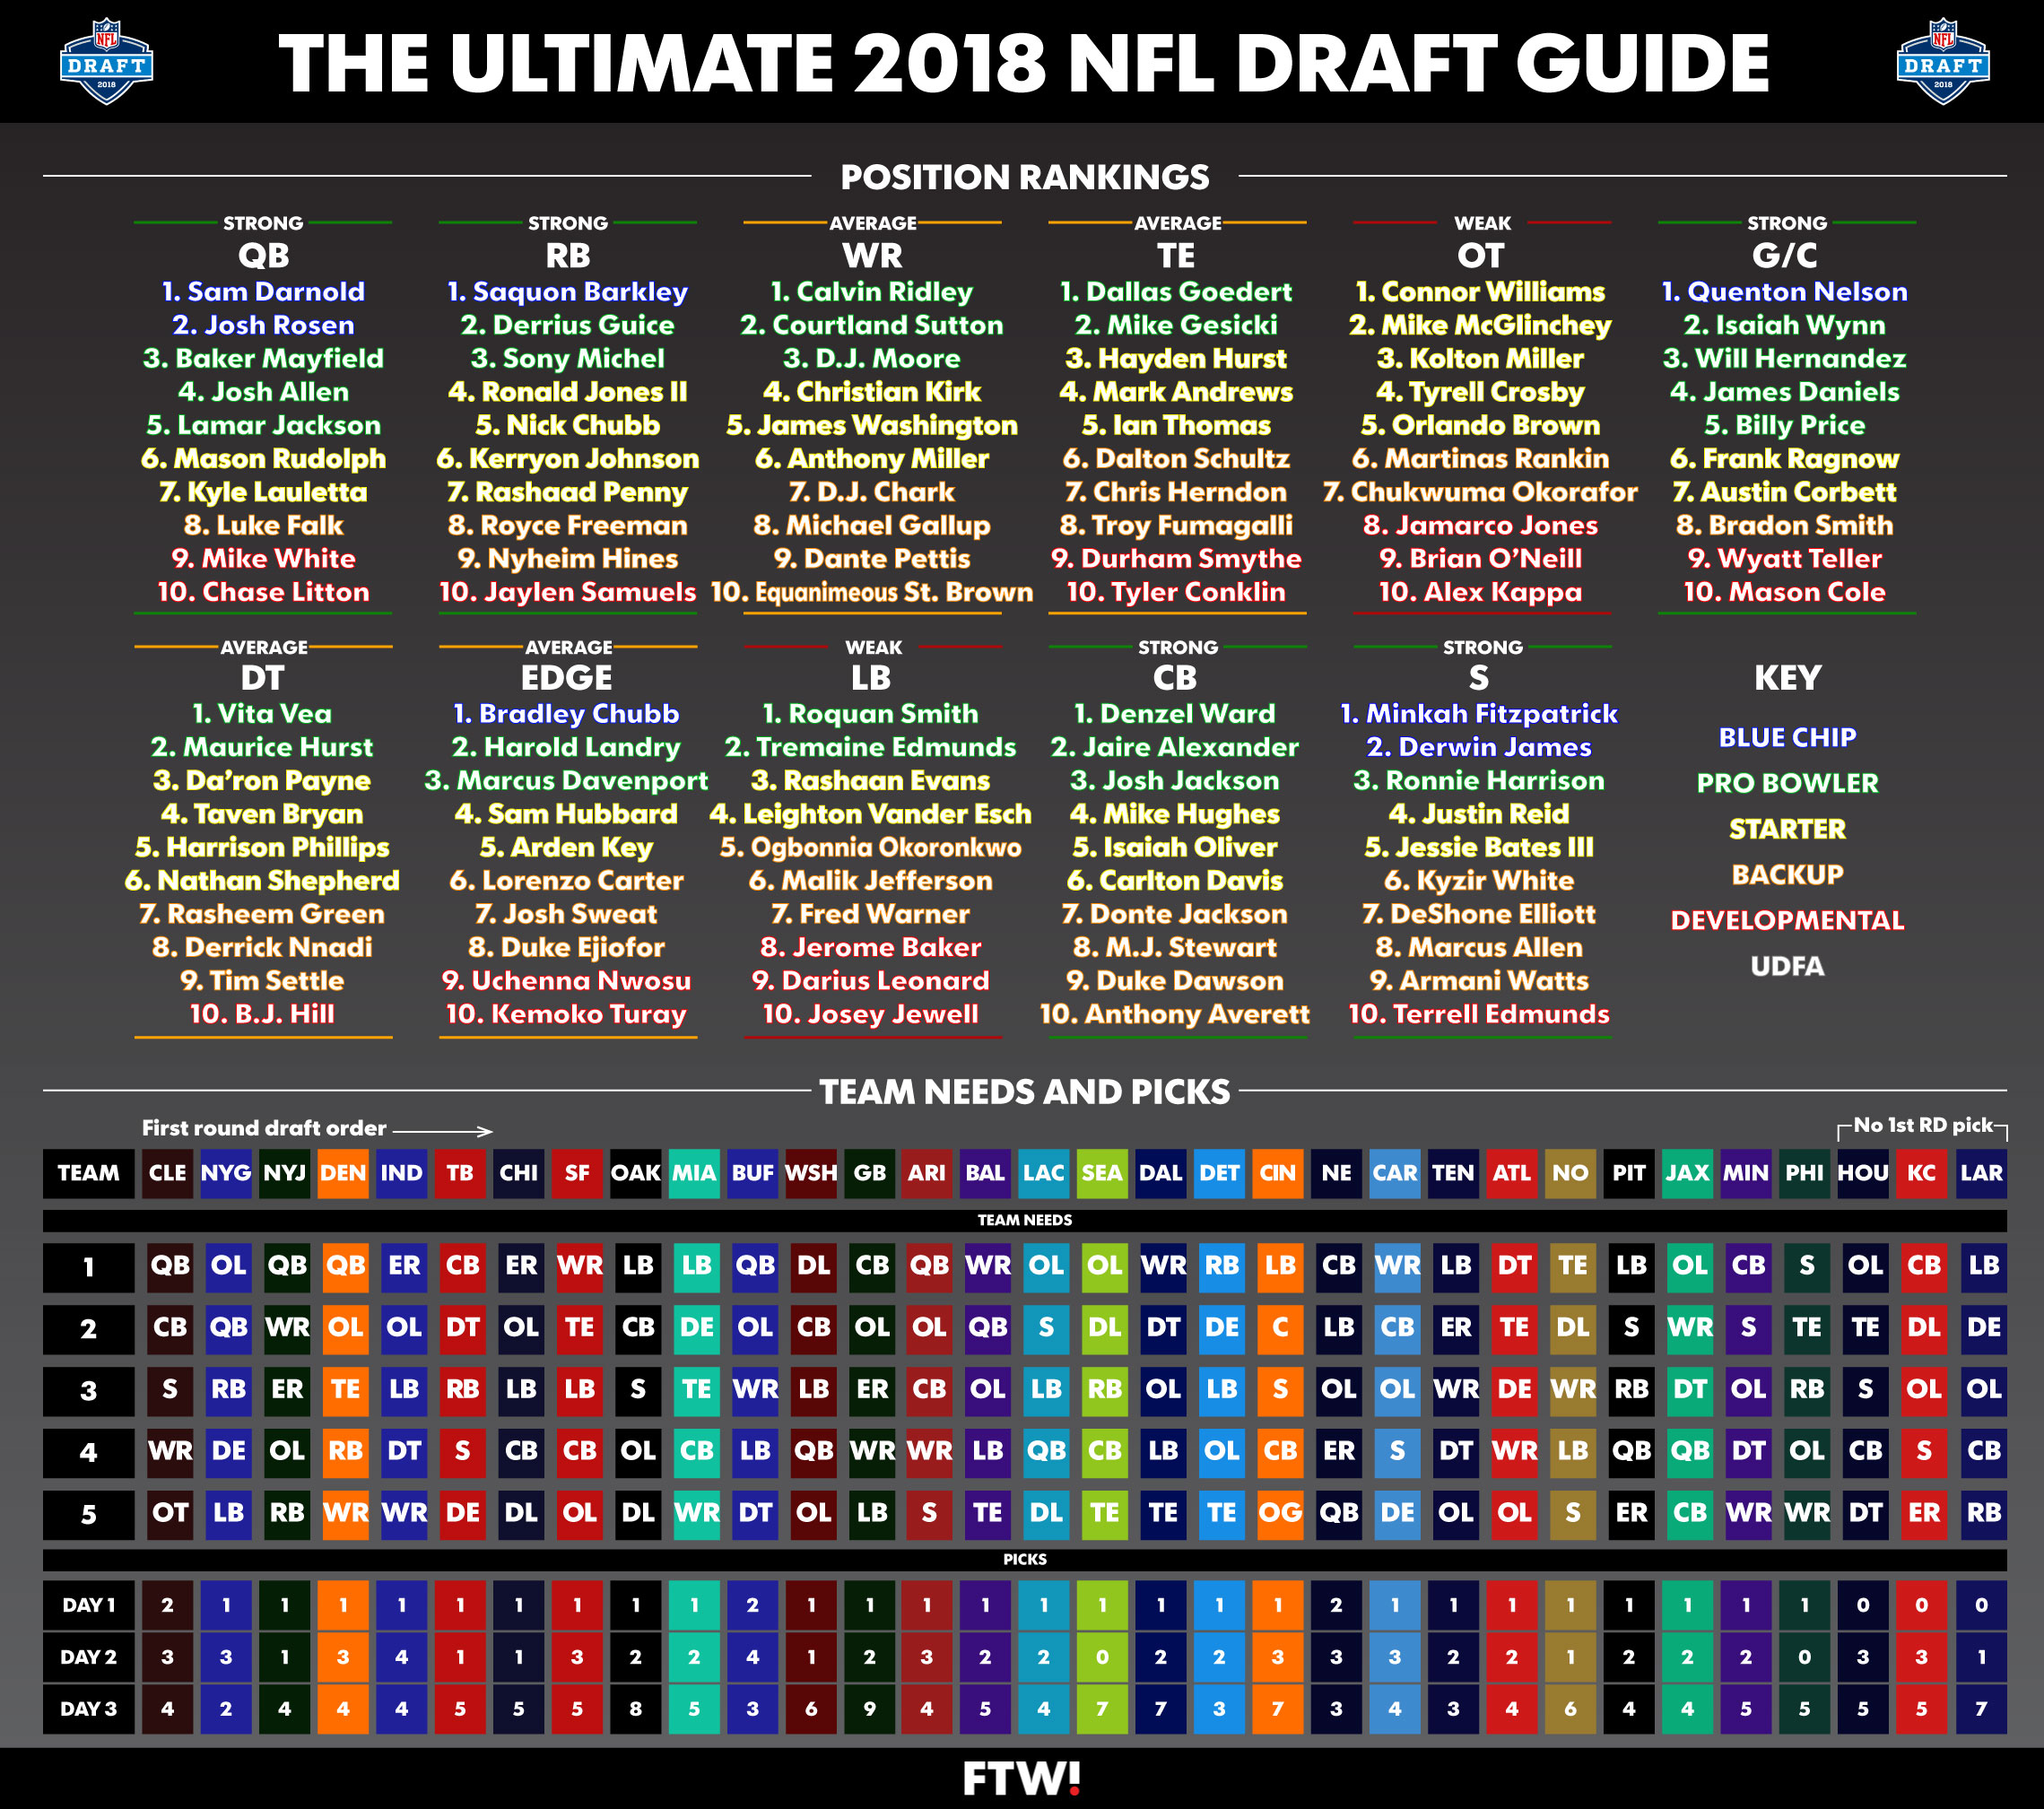 Everything you need to know about the 2018 NFL draft in one graphic